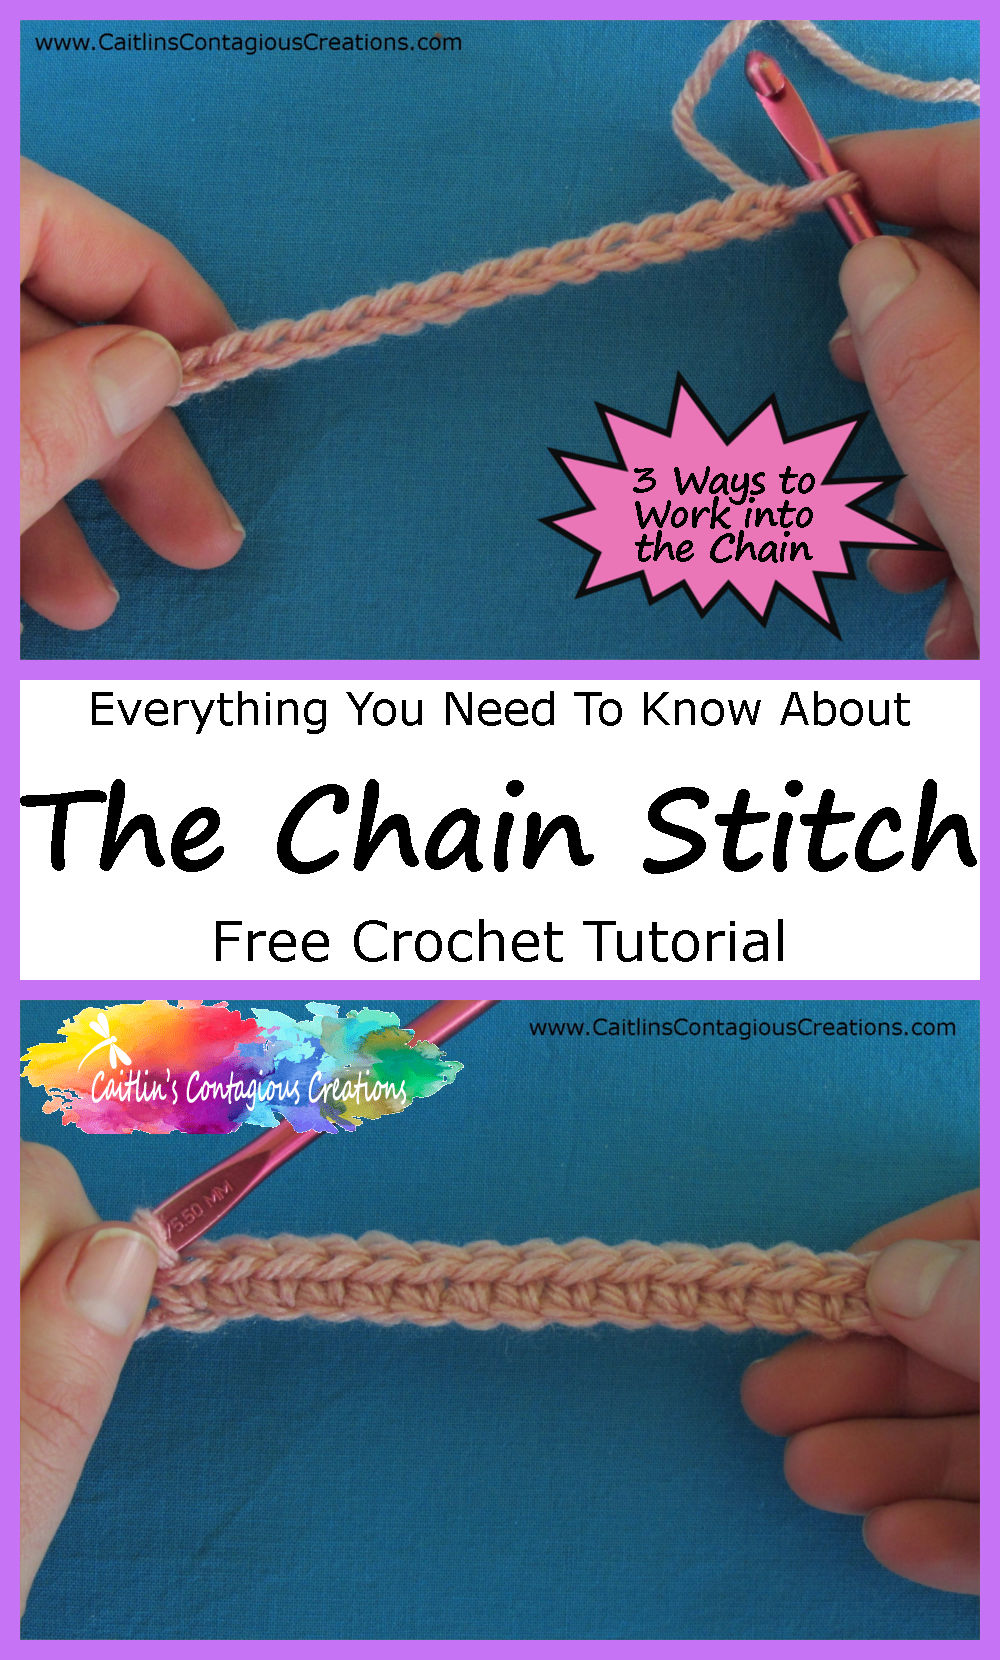 Crochet Chain Stitch Tutorial Photos Text overlay of Everything You Need to Know About The Chain Stitch Free Crochet Lesson